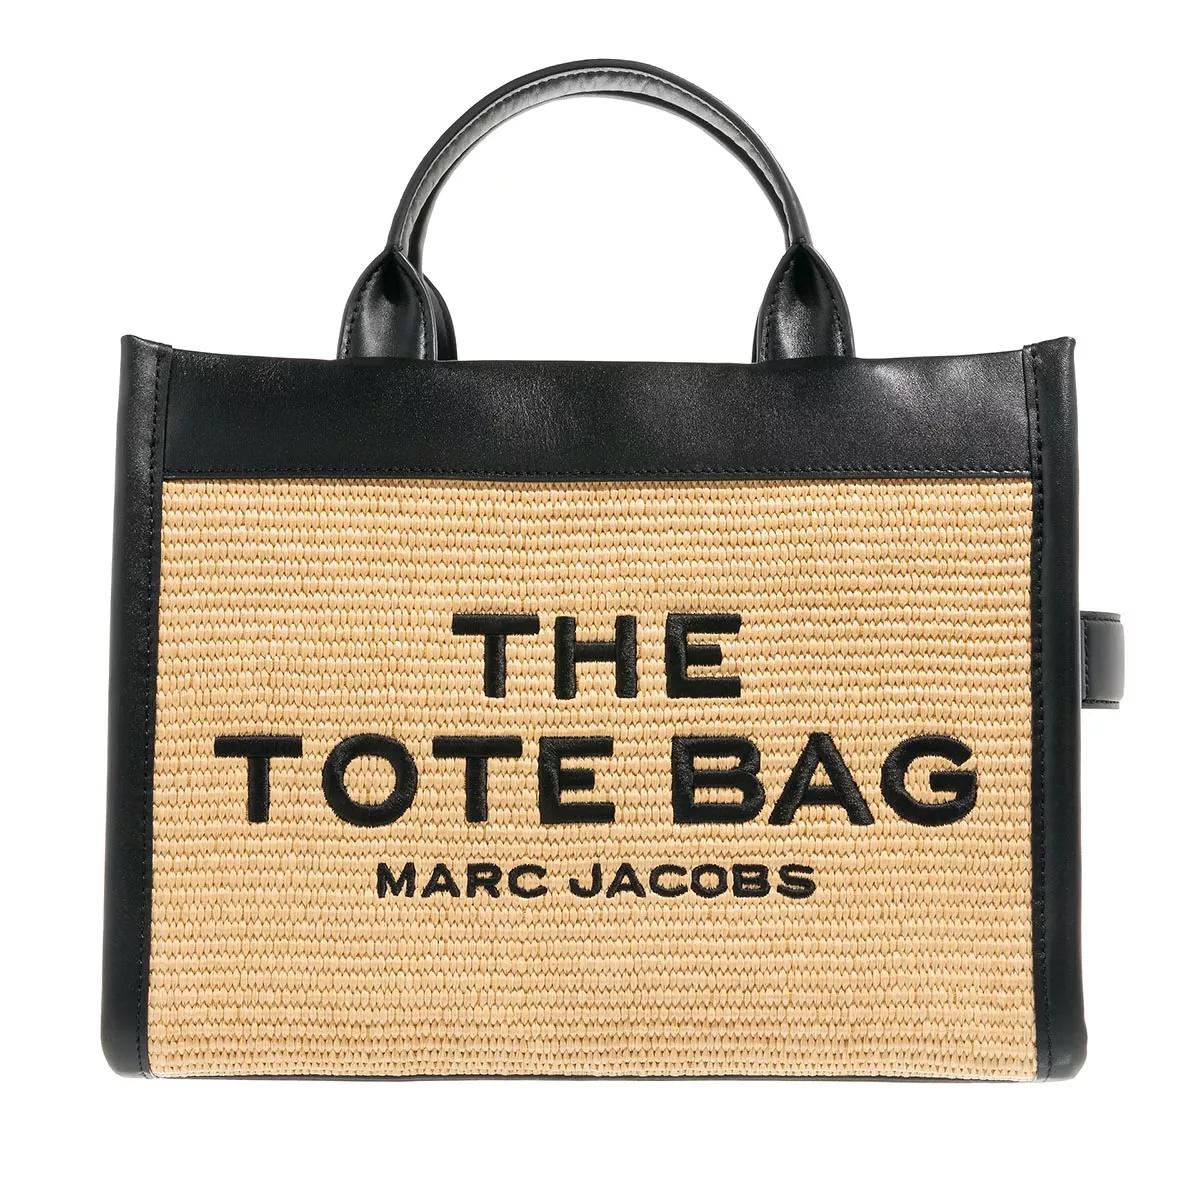 Marc Jacobs The Woven Medium Tote Bag Natural Black Tote fashionette